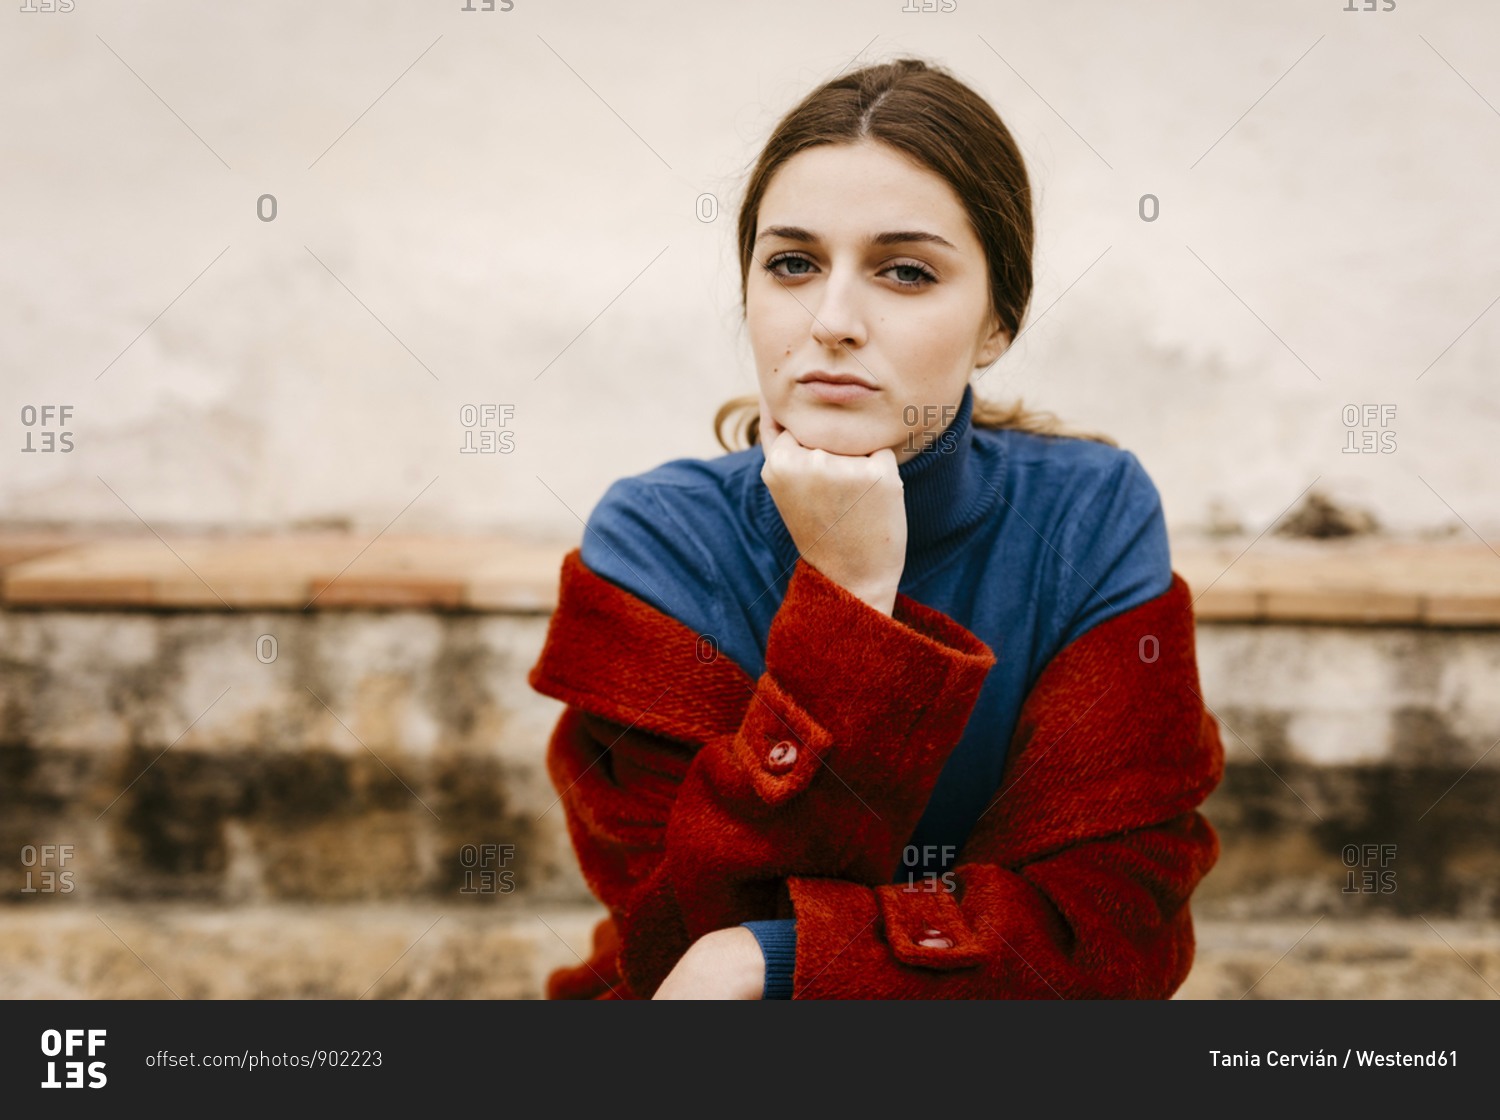 Close up portrait of woman with blue turtleneck pullover and red coat- hand on chin